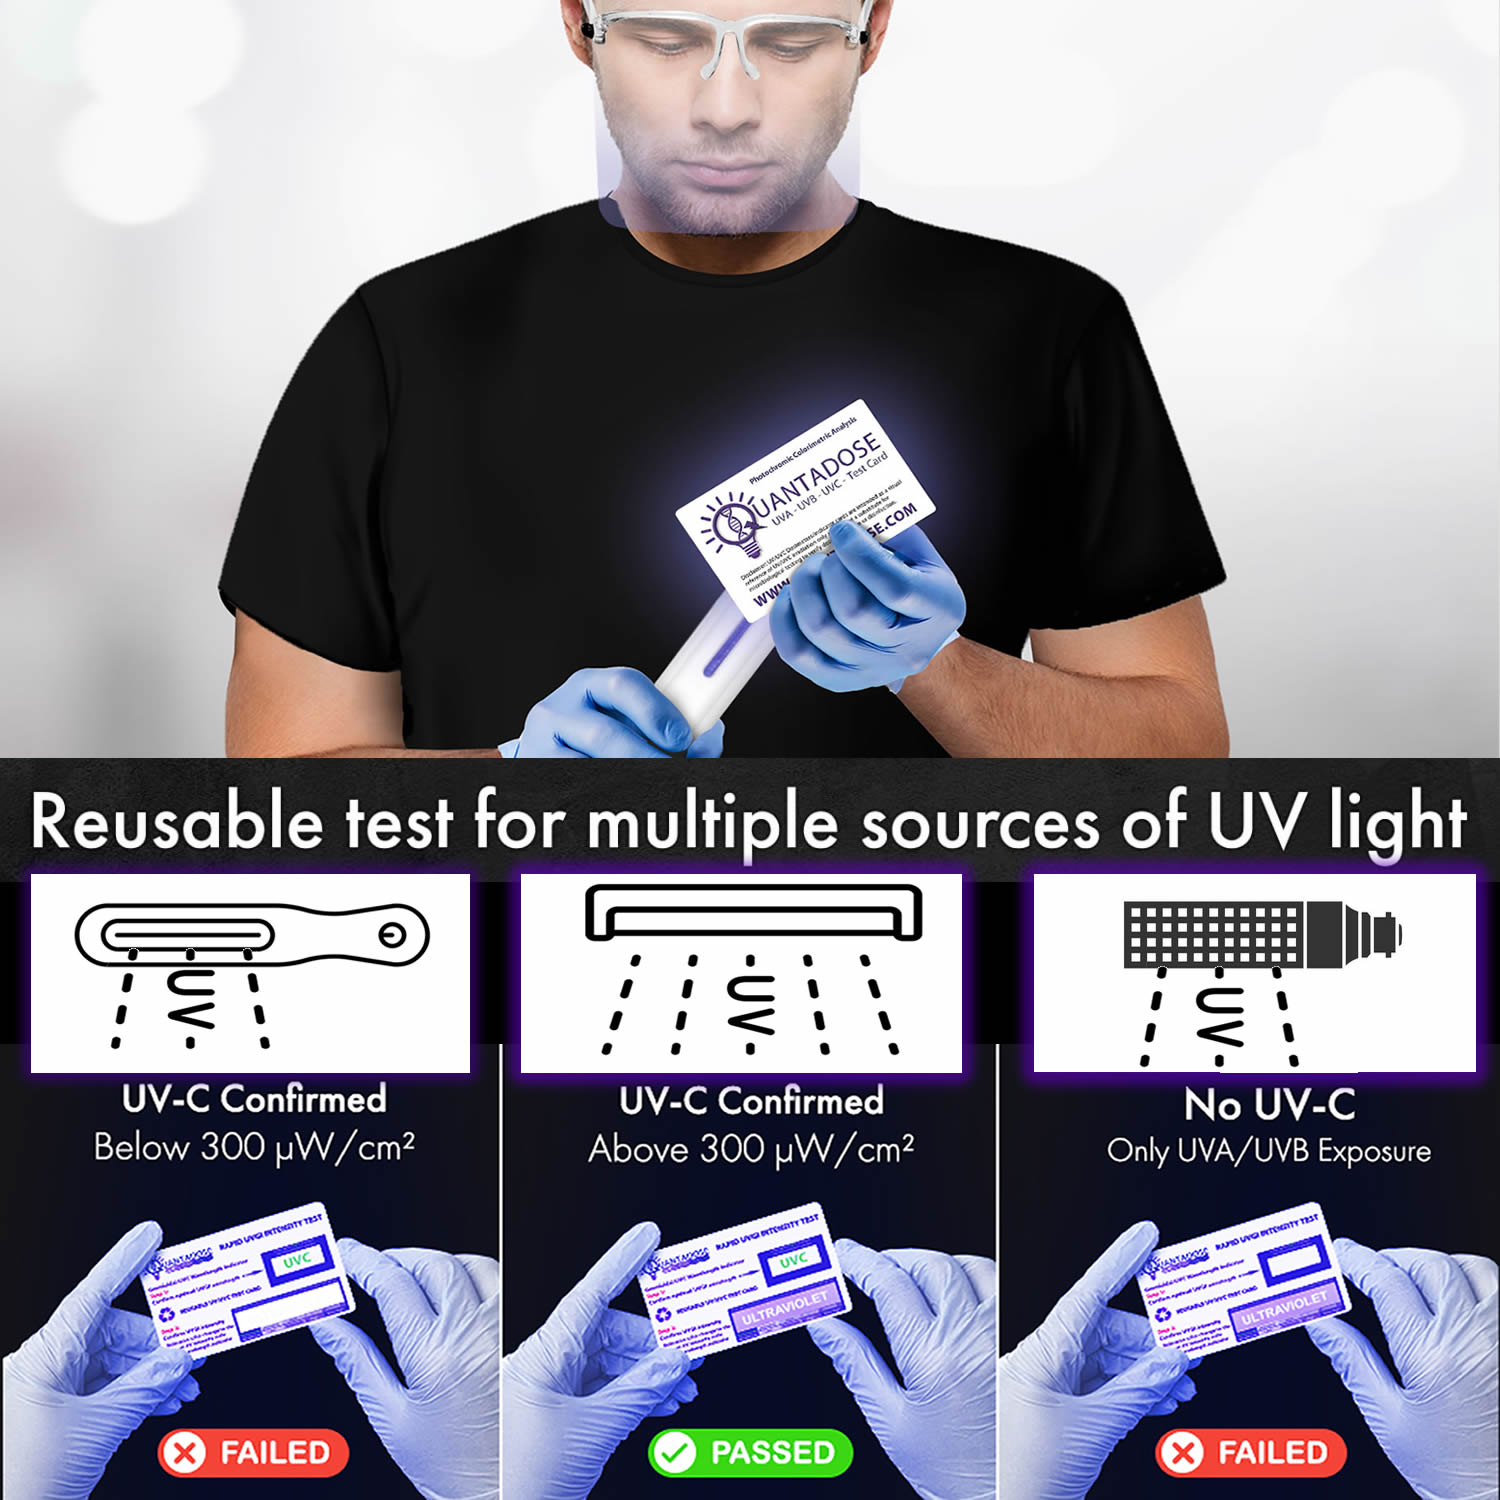 QuantaDose Reusable UV-C Light Test Card for UVC Lamps and UV LED Sanitizer Wands, Size: 85.60 x 0.76 x 53.98 mm, White